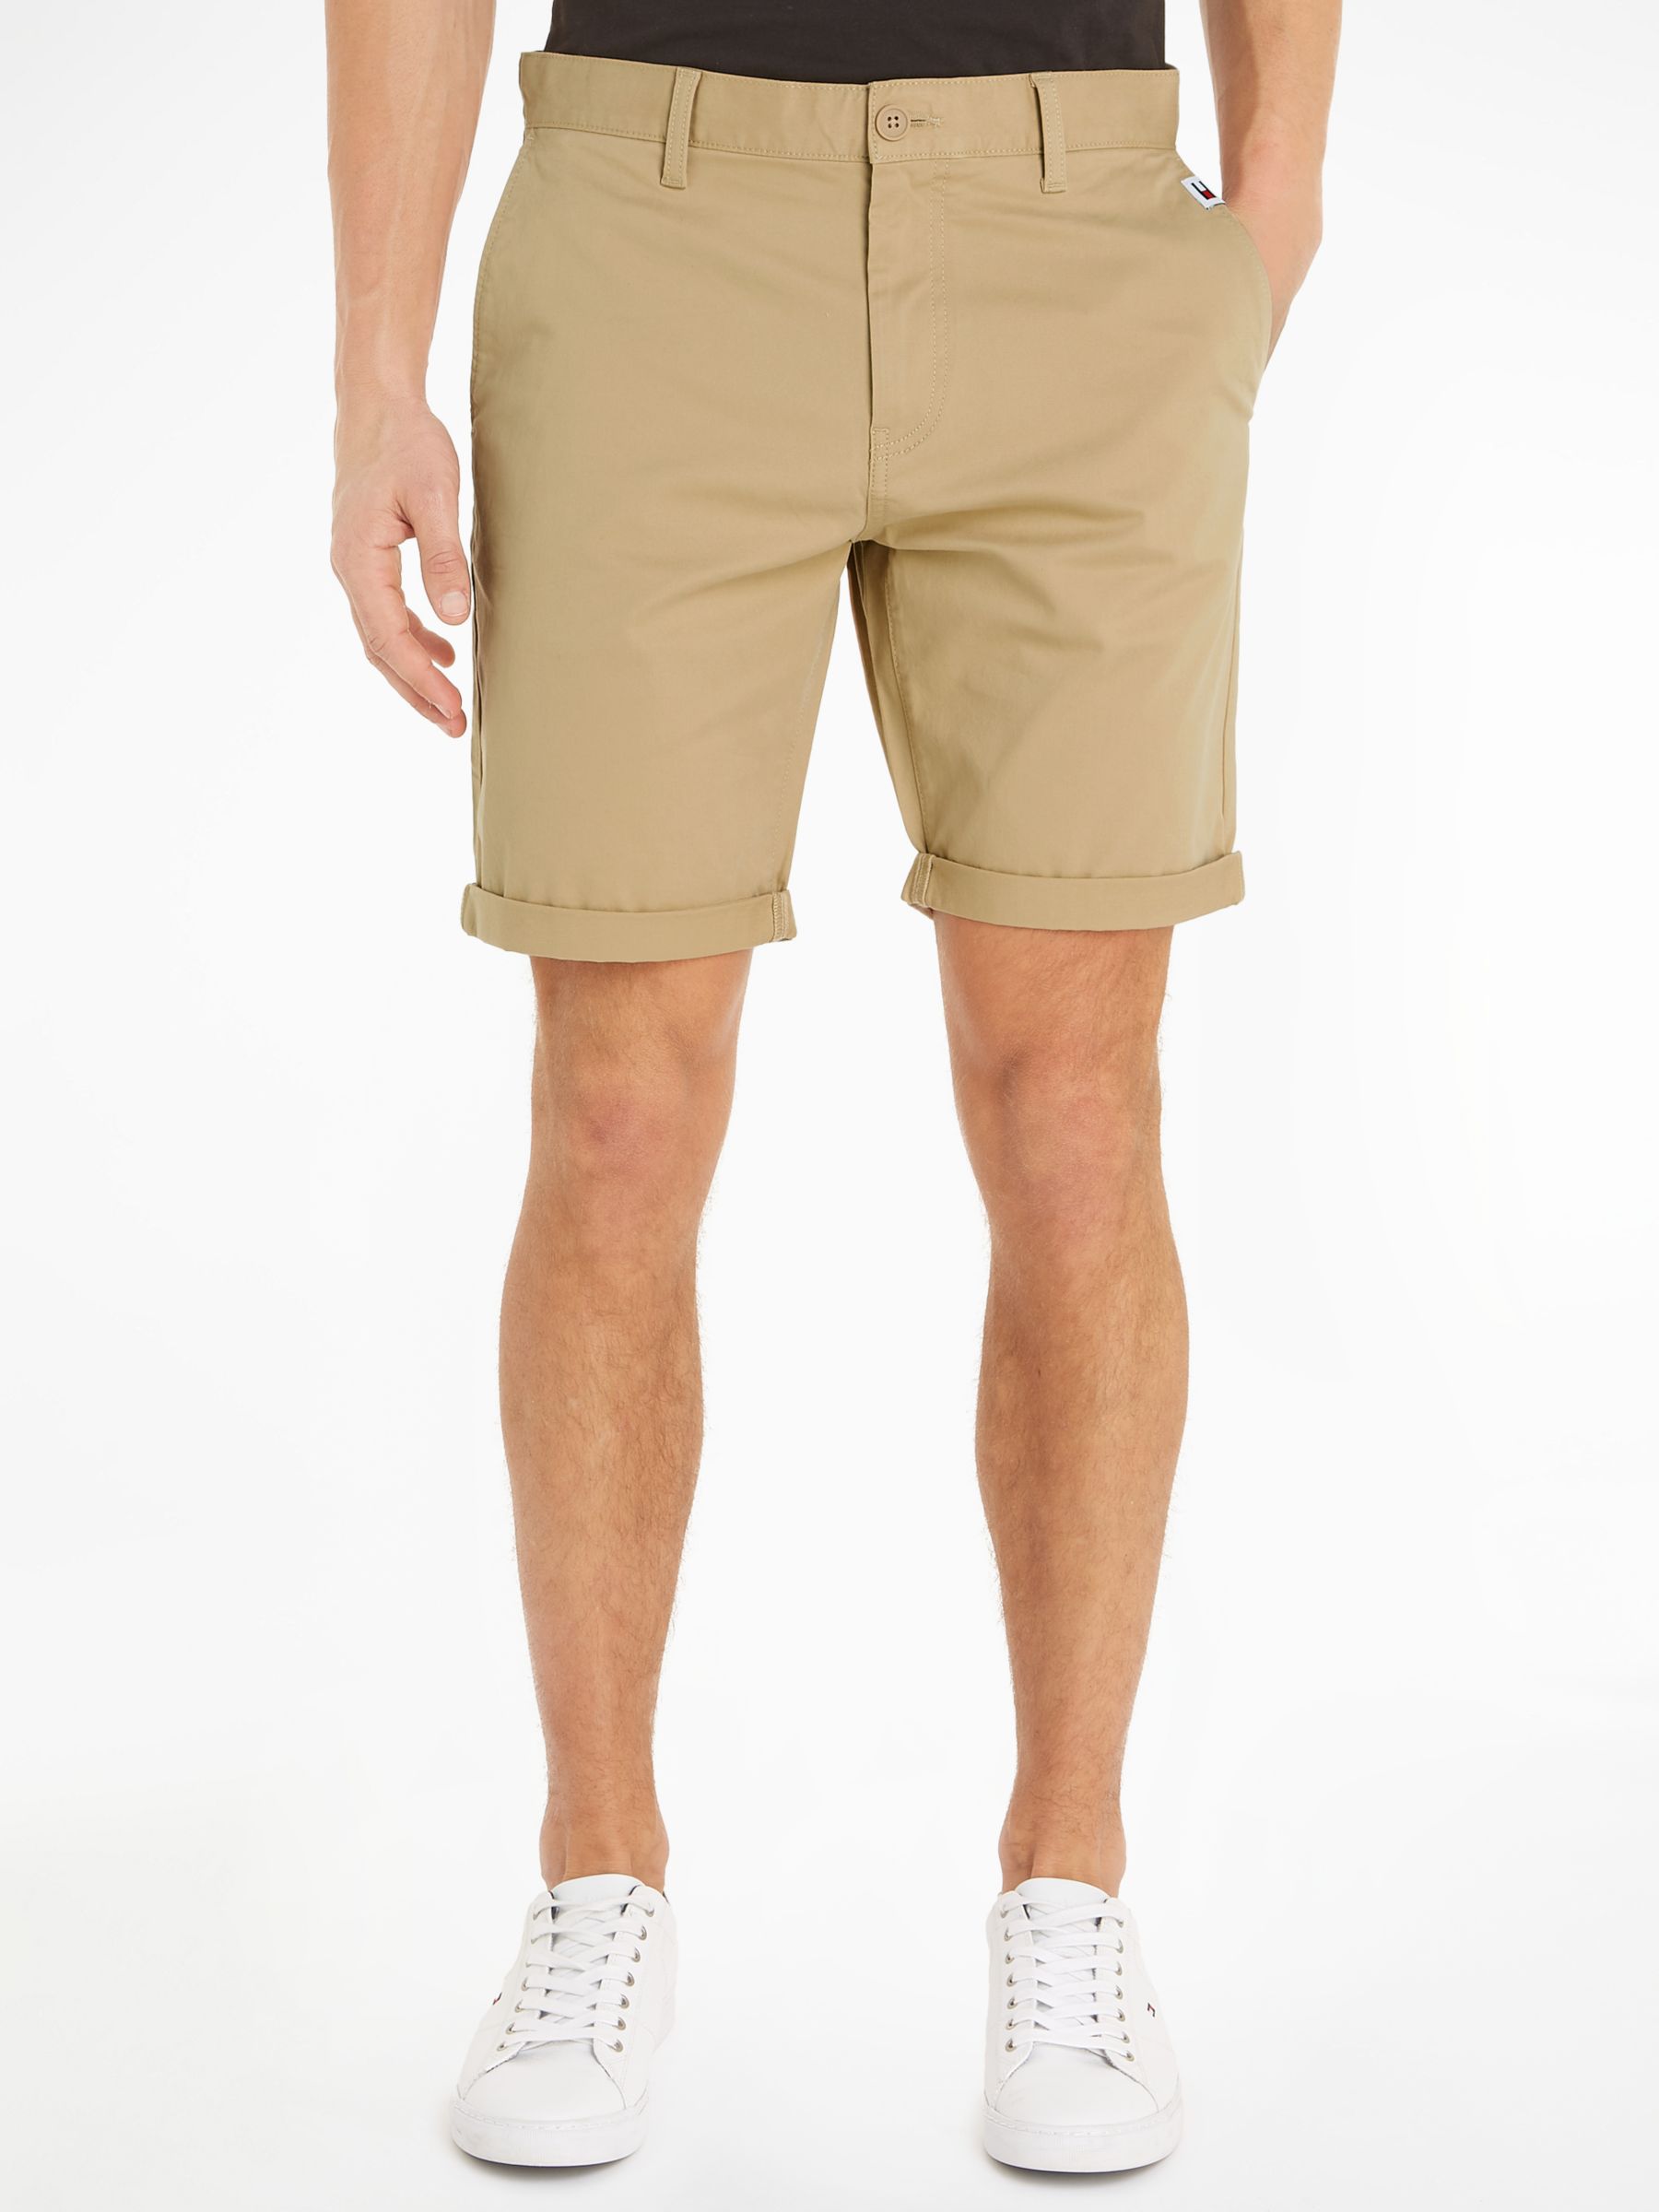 Tommy Jeans Scanton Chino Shorts, Tawny Sand, 30R